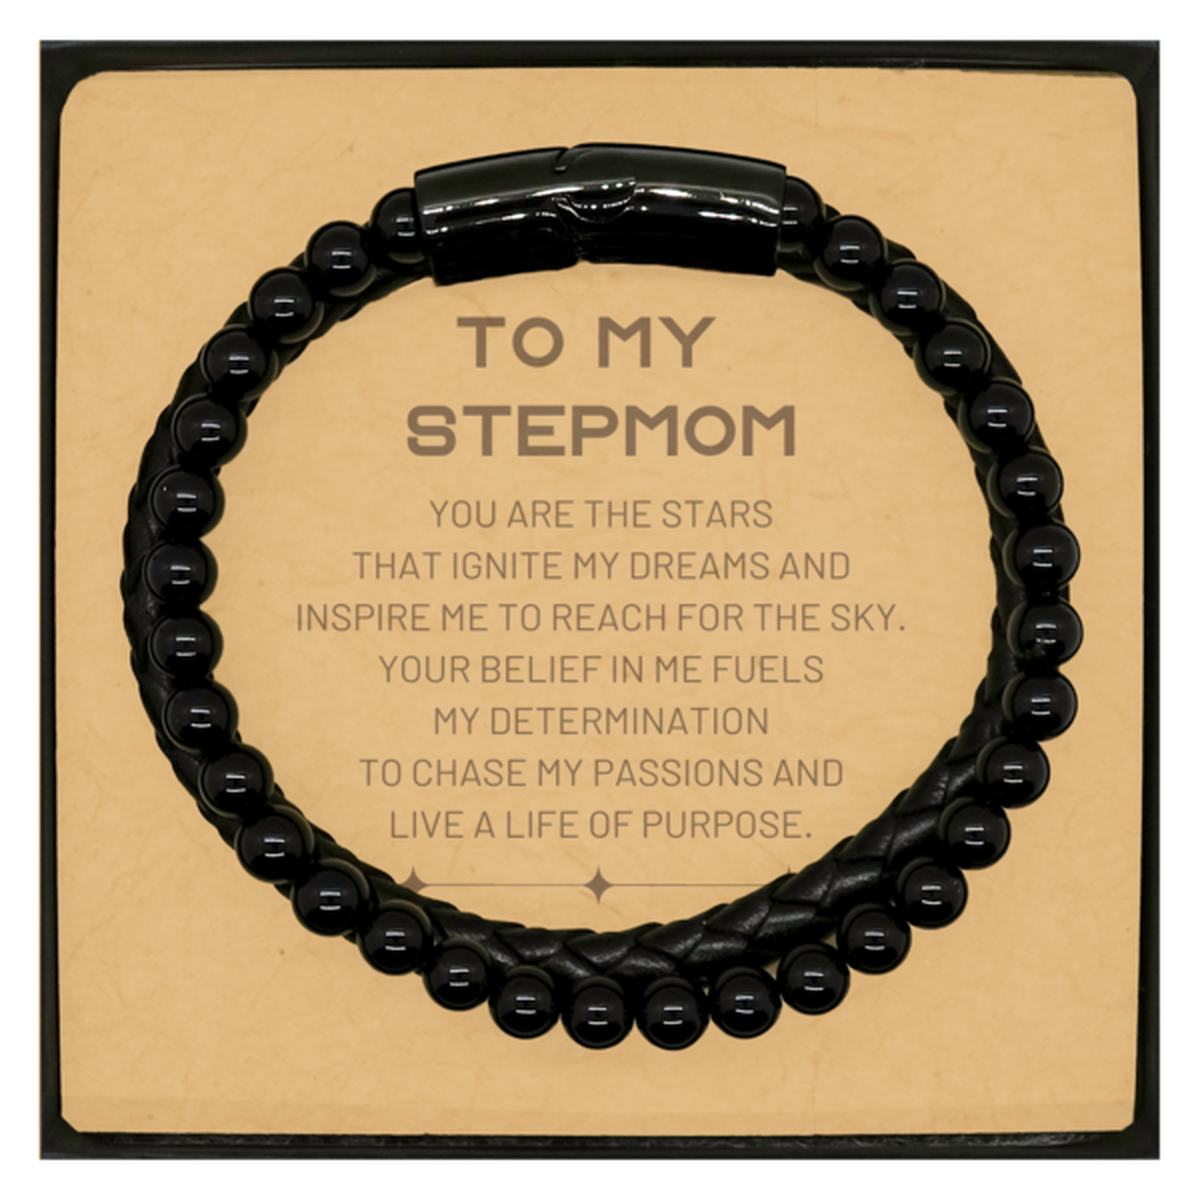 To My Stepmom Stone Leather Bracelets, You are the stars that ignite my dreams and inspire me to reach for the sky, Birthday Christmas Unique Gifts For Stepmom, Thank You Gifts For Stepmom